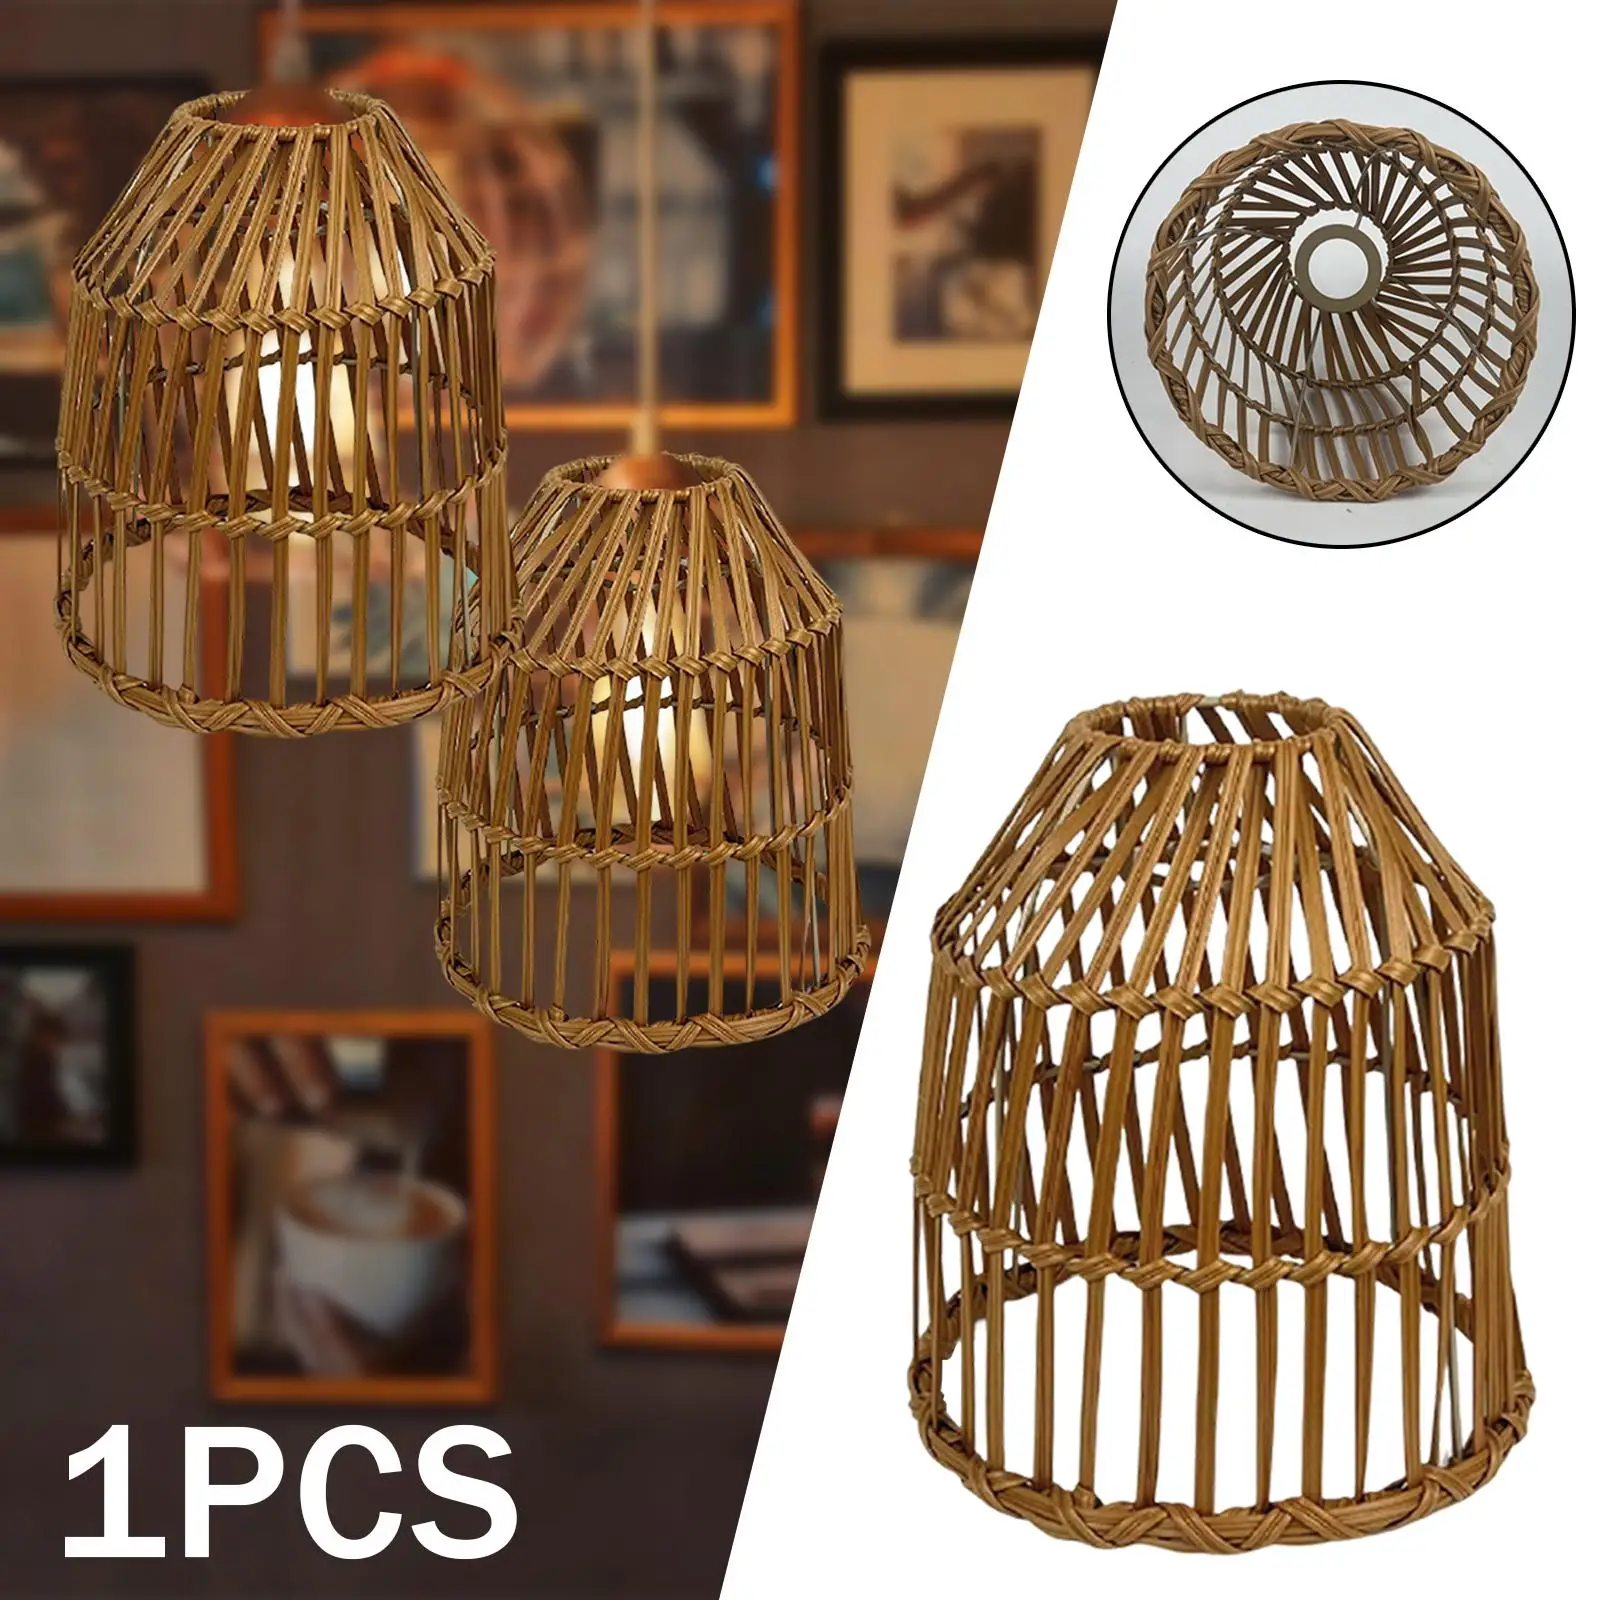 Ceiling Lamp Shade Hand Weaved Ceiling Fixtures for Kitchen Home Decoration